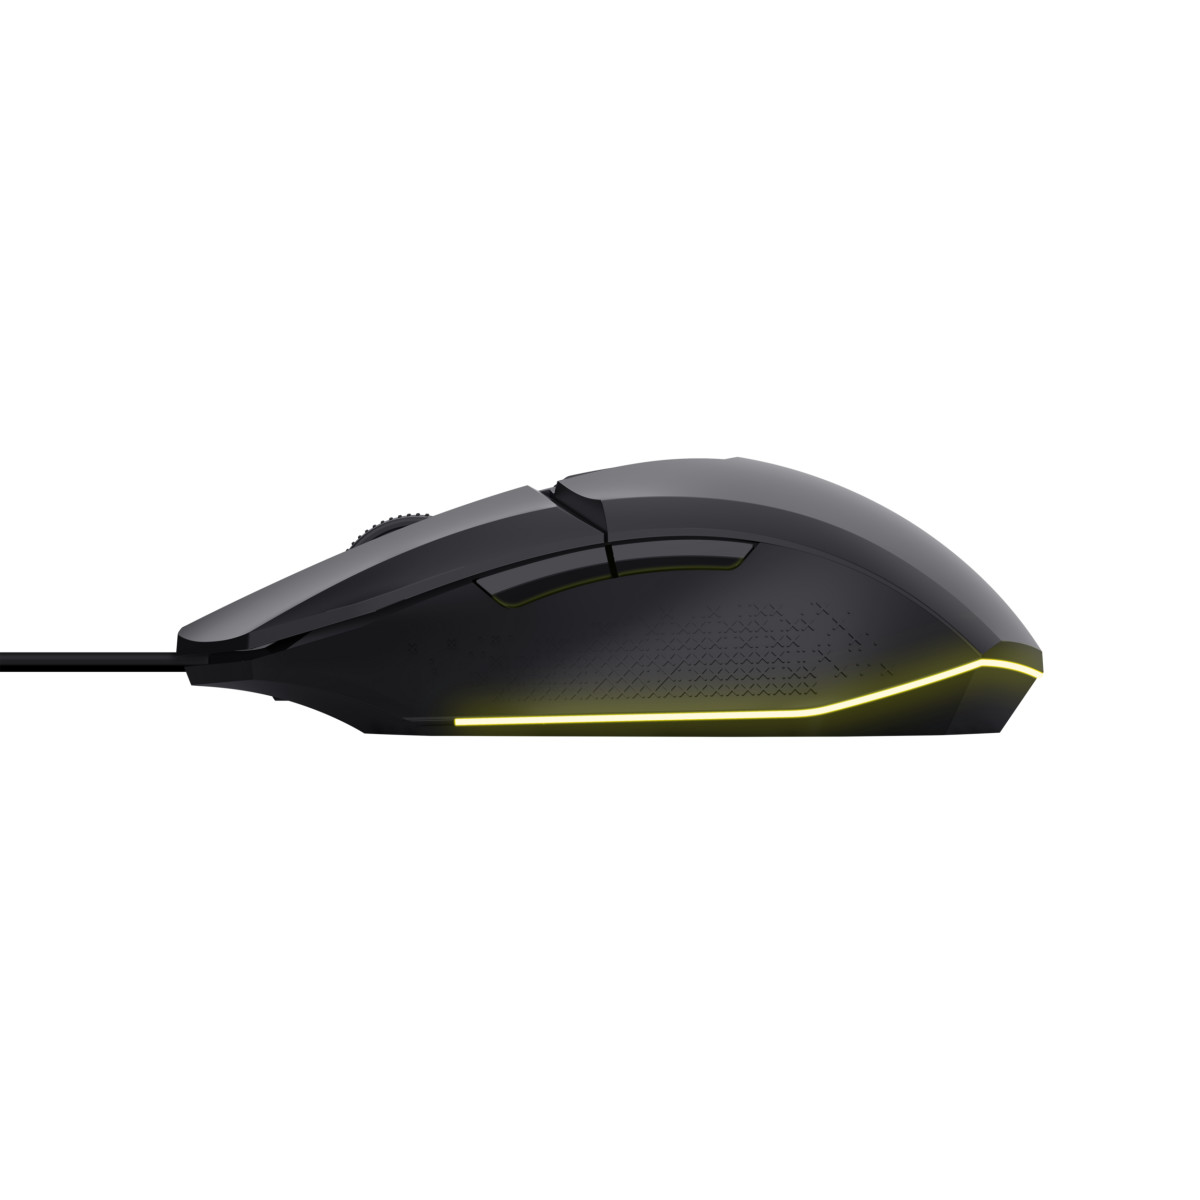 GXT109 Felox Gaming Mouse Black